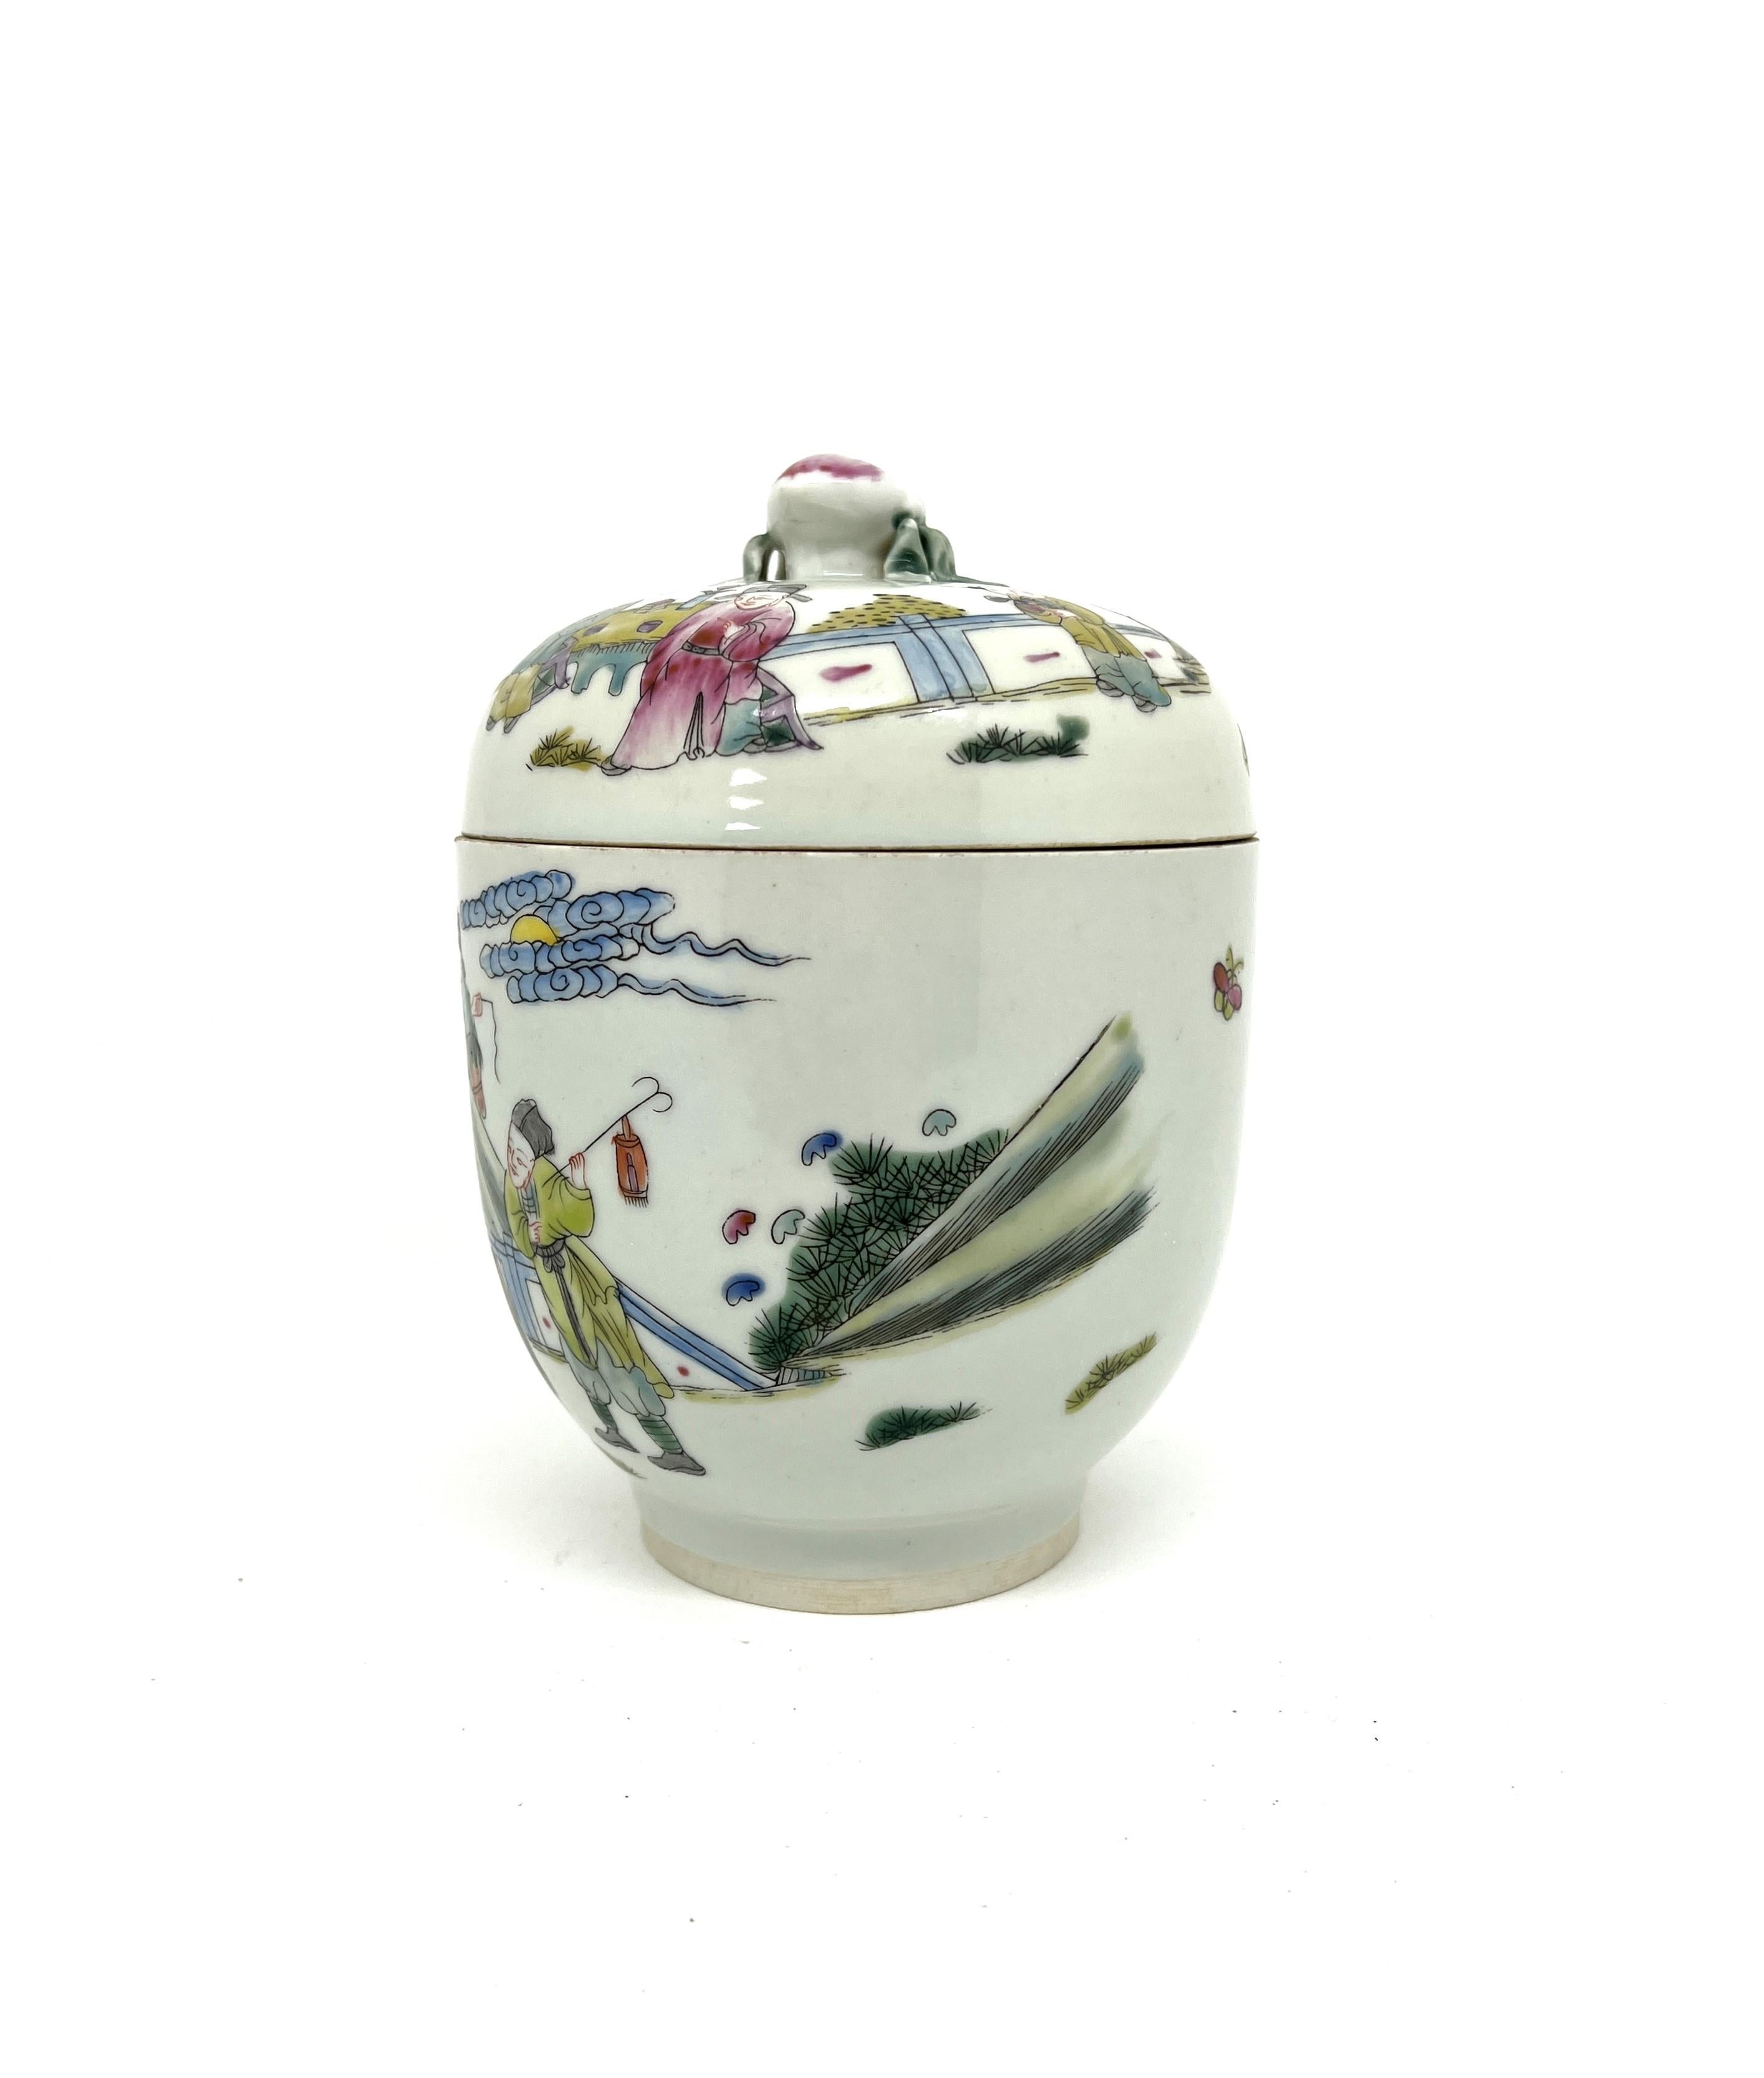 This small, oval-shaped jar features vibrant and striking enamels characteristic of famille verte porcelain. Crafted from an exceptionally refined paste, it belongs to a superior quality of ceramic ware. Famille verte is distinguished by its